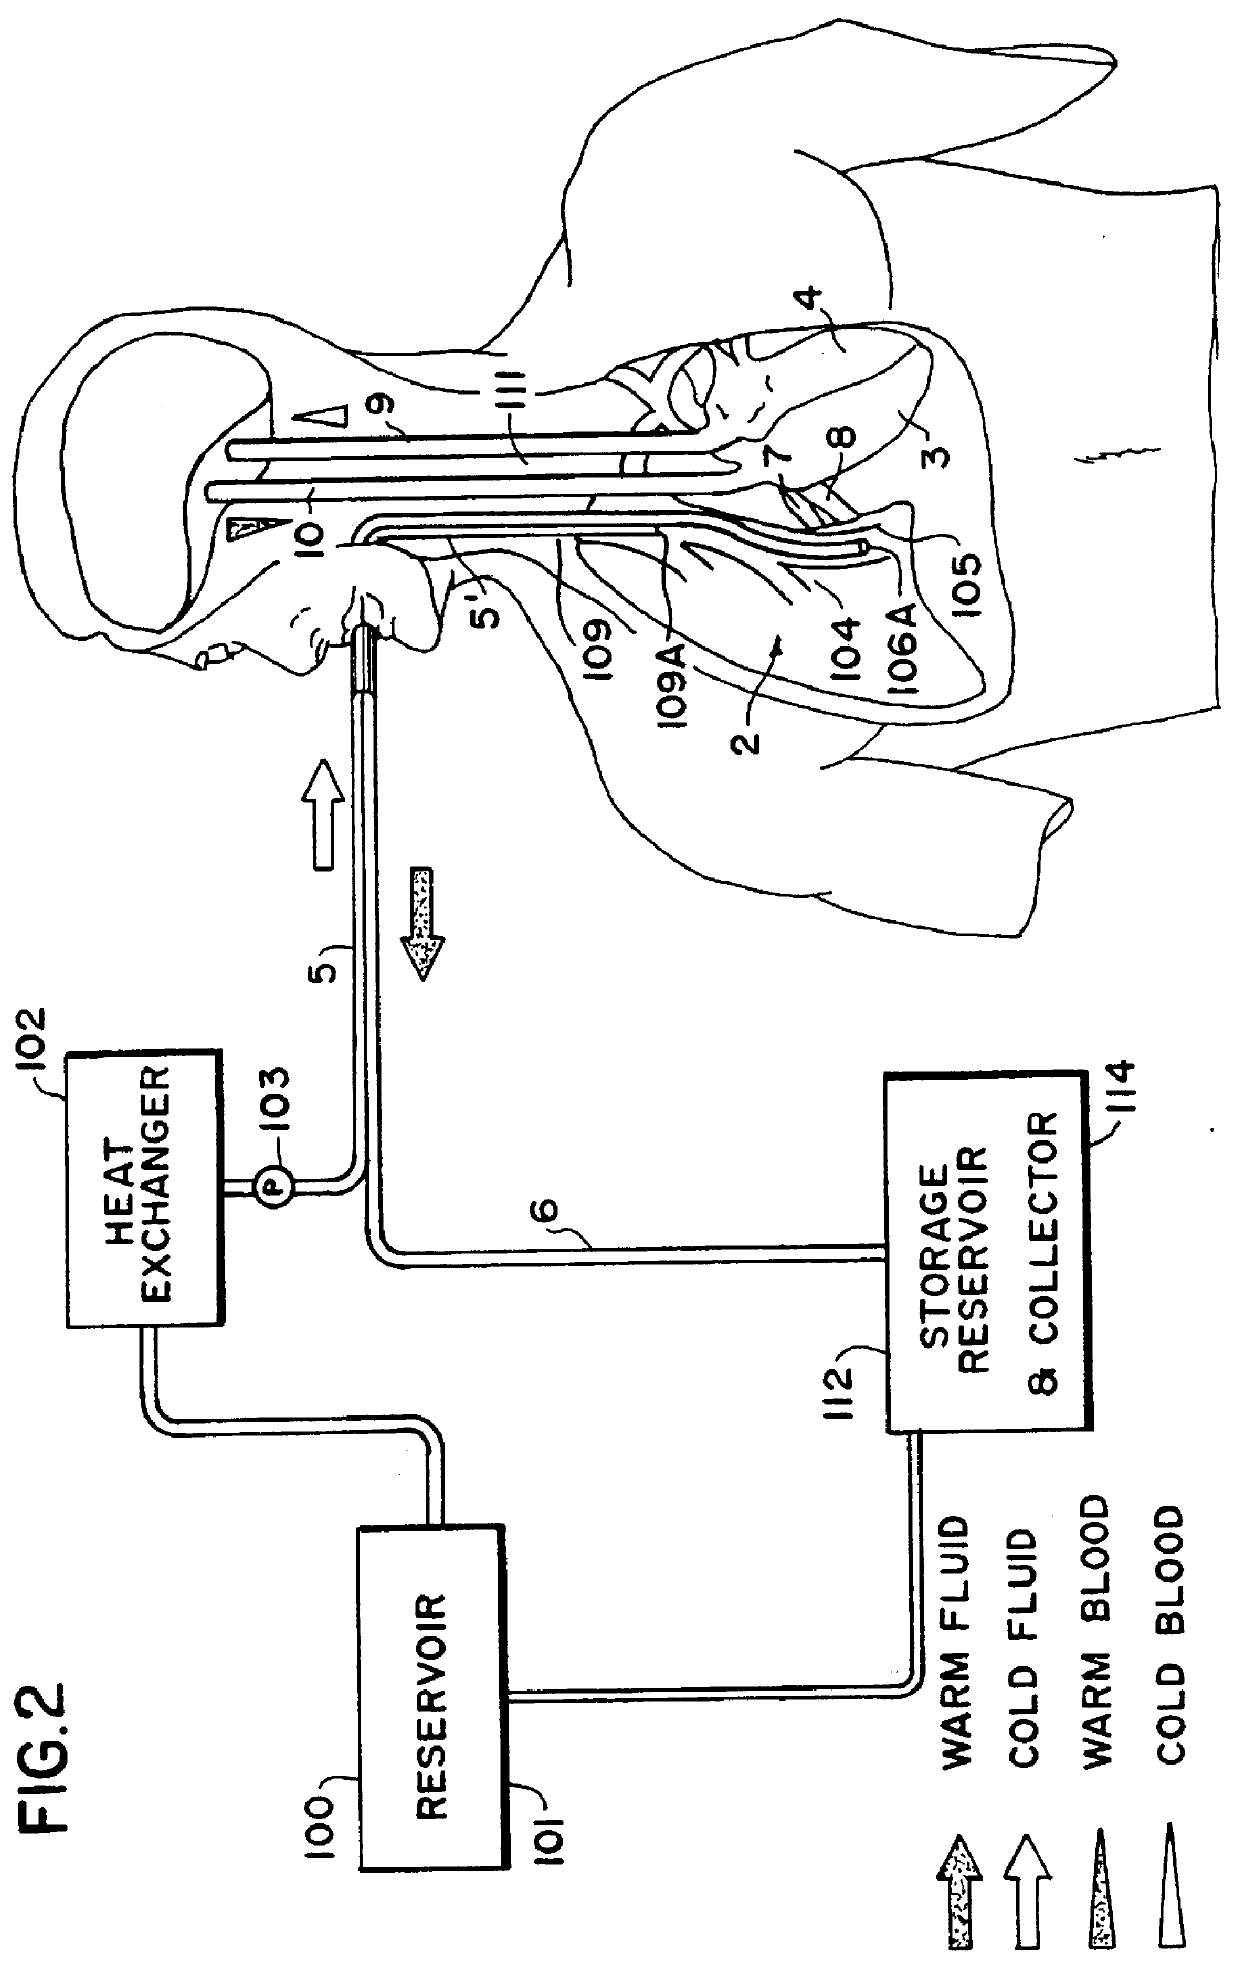 Apparatus and method for the rapid induction of hypothermic brain preservation